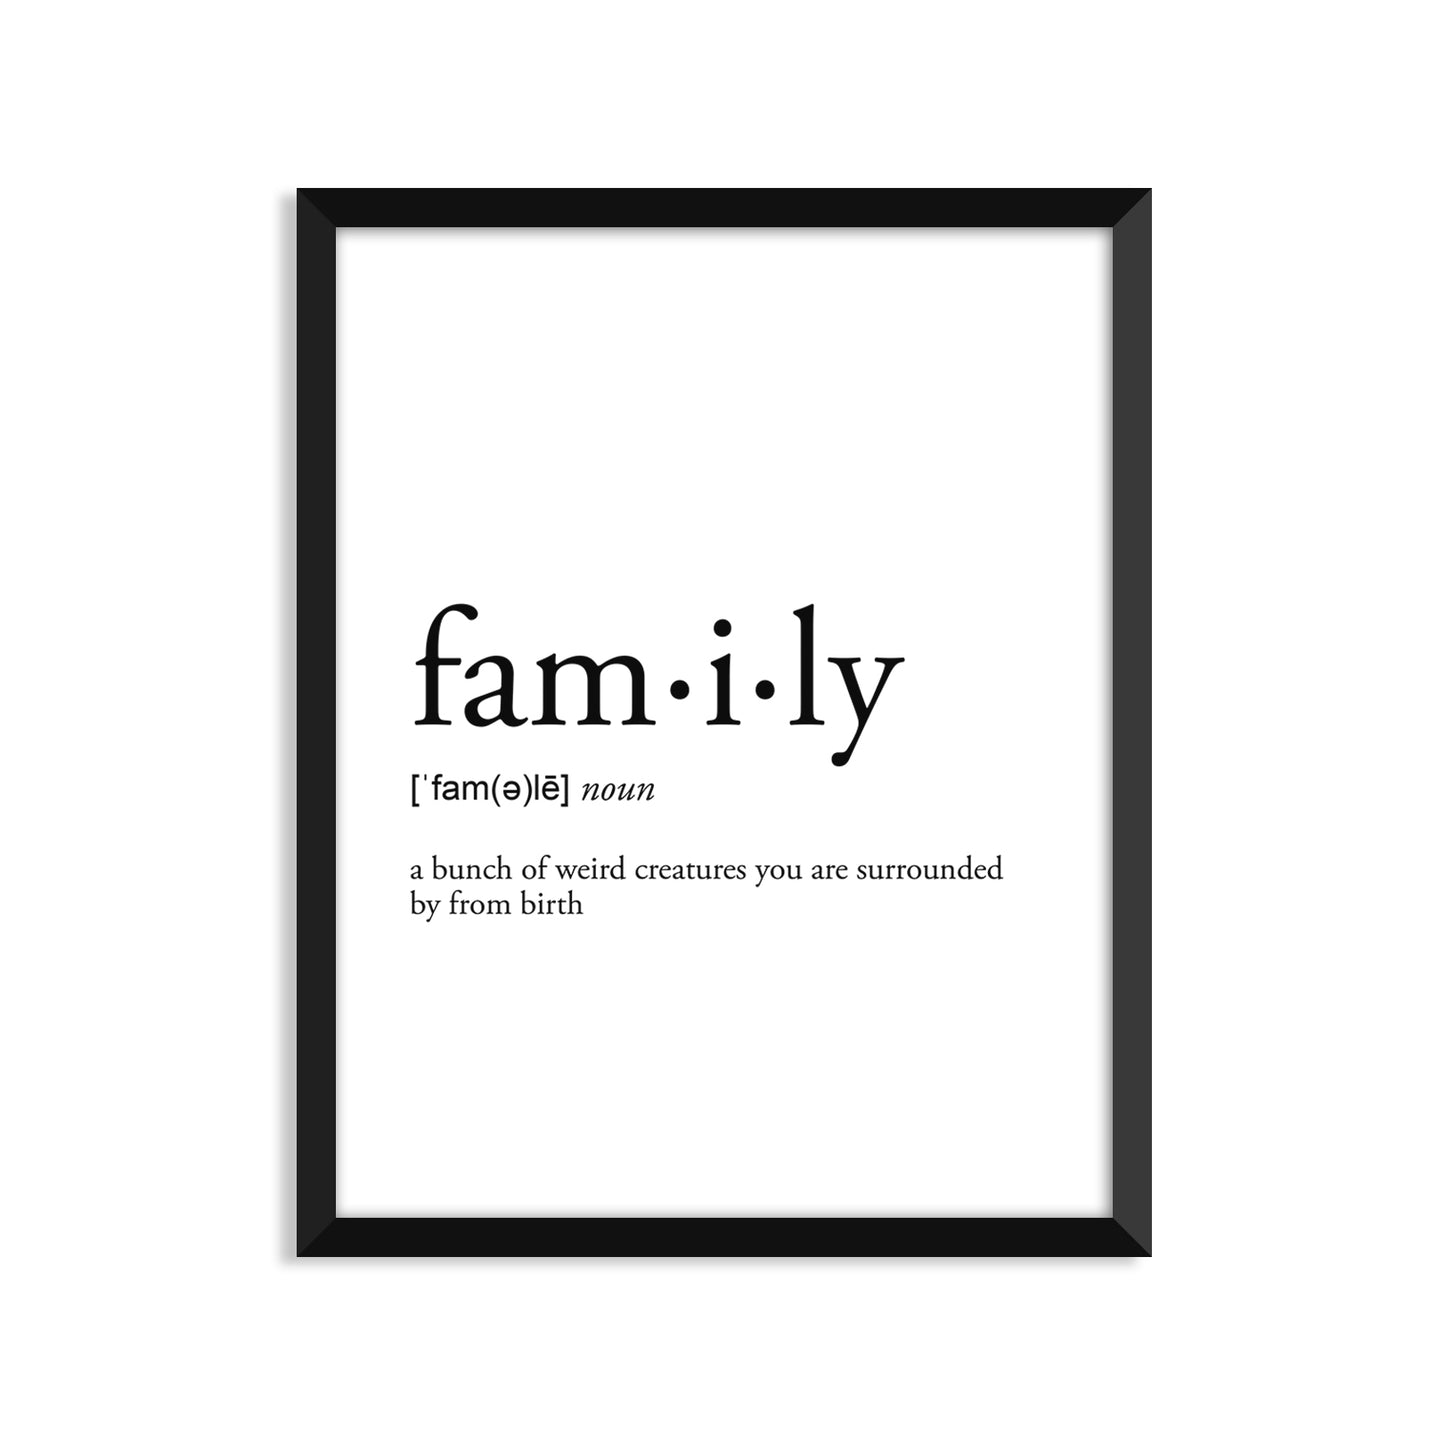 Family Definition - Unframed Art Print Or Greeting Card